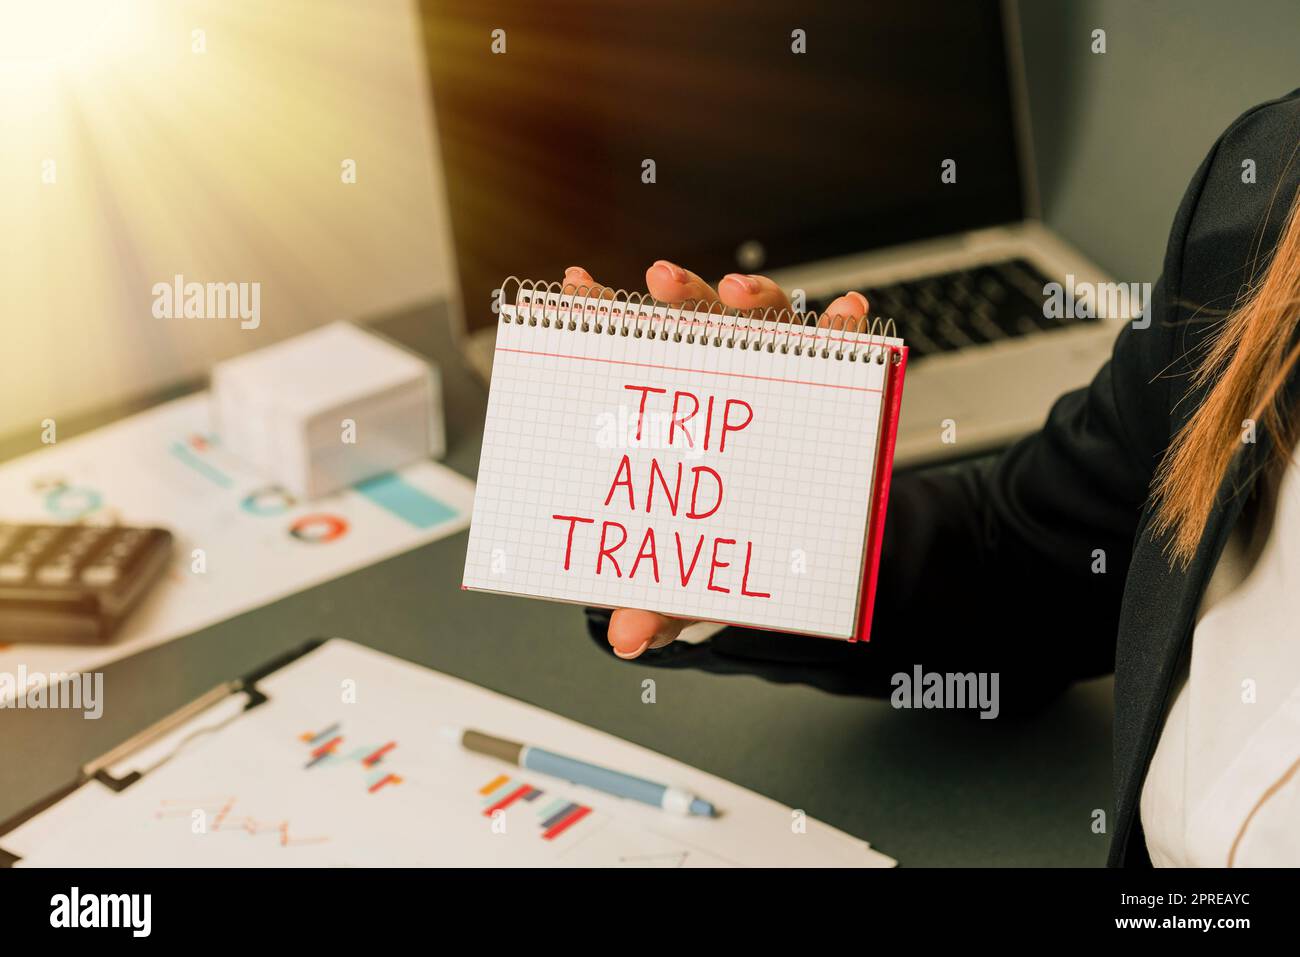 Sign displaying Trip And Travel, Business overview famous landmarks and tourist destinations planning Stock Photo